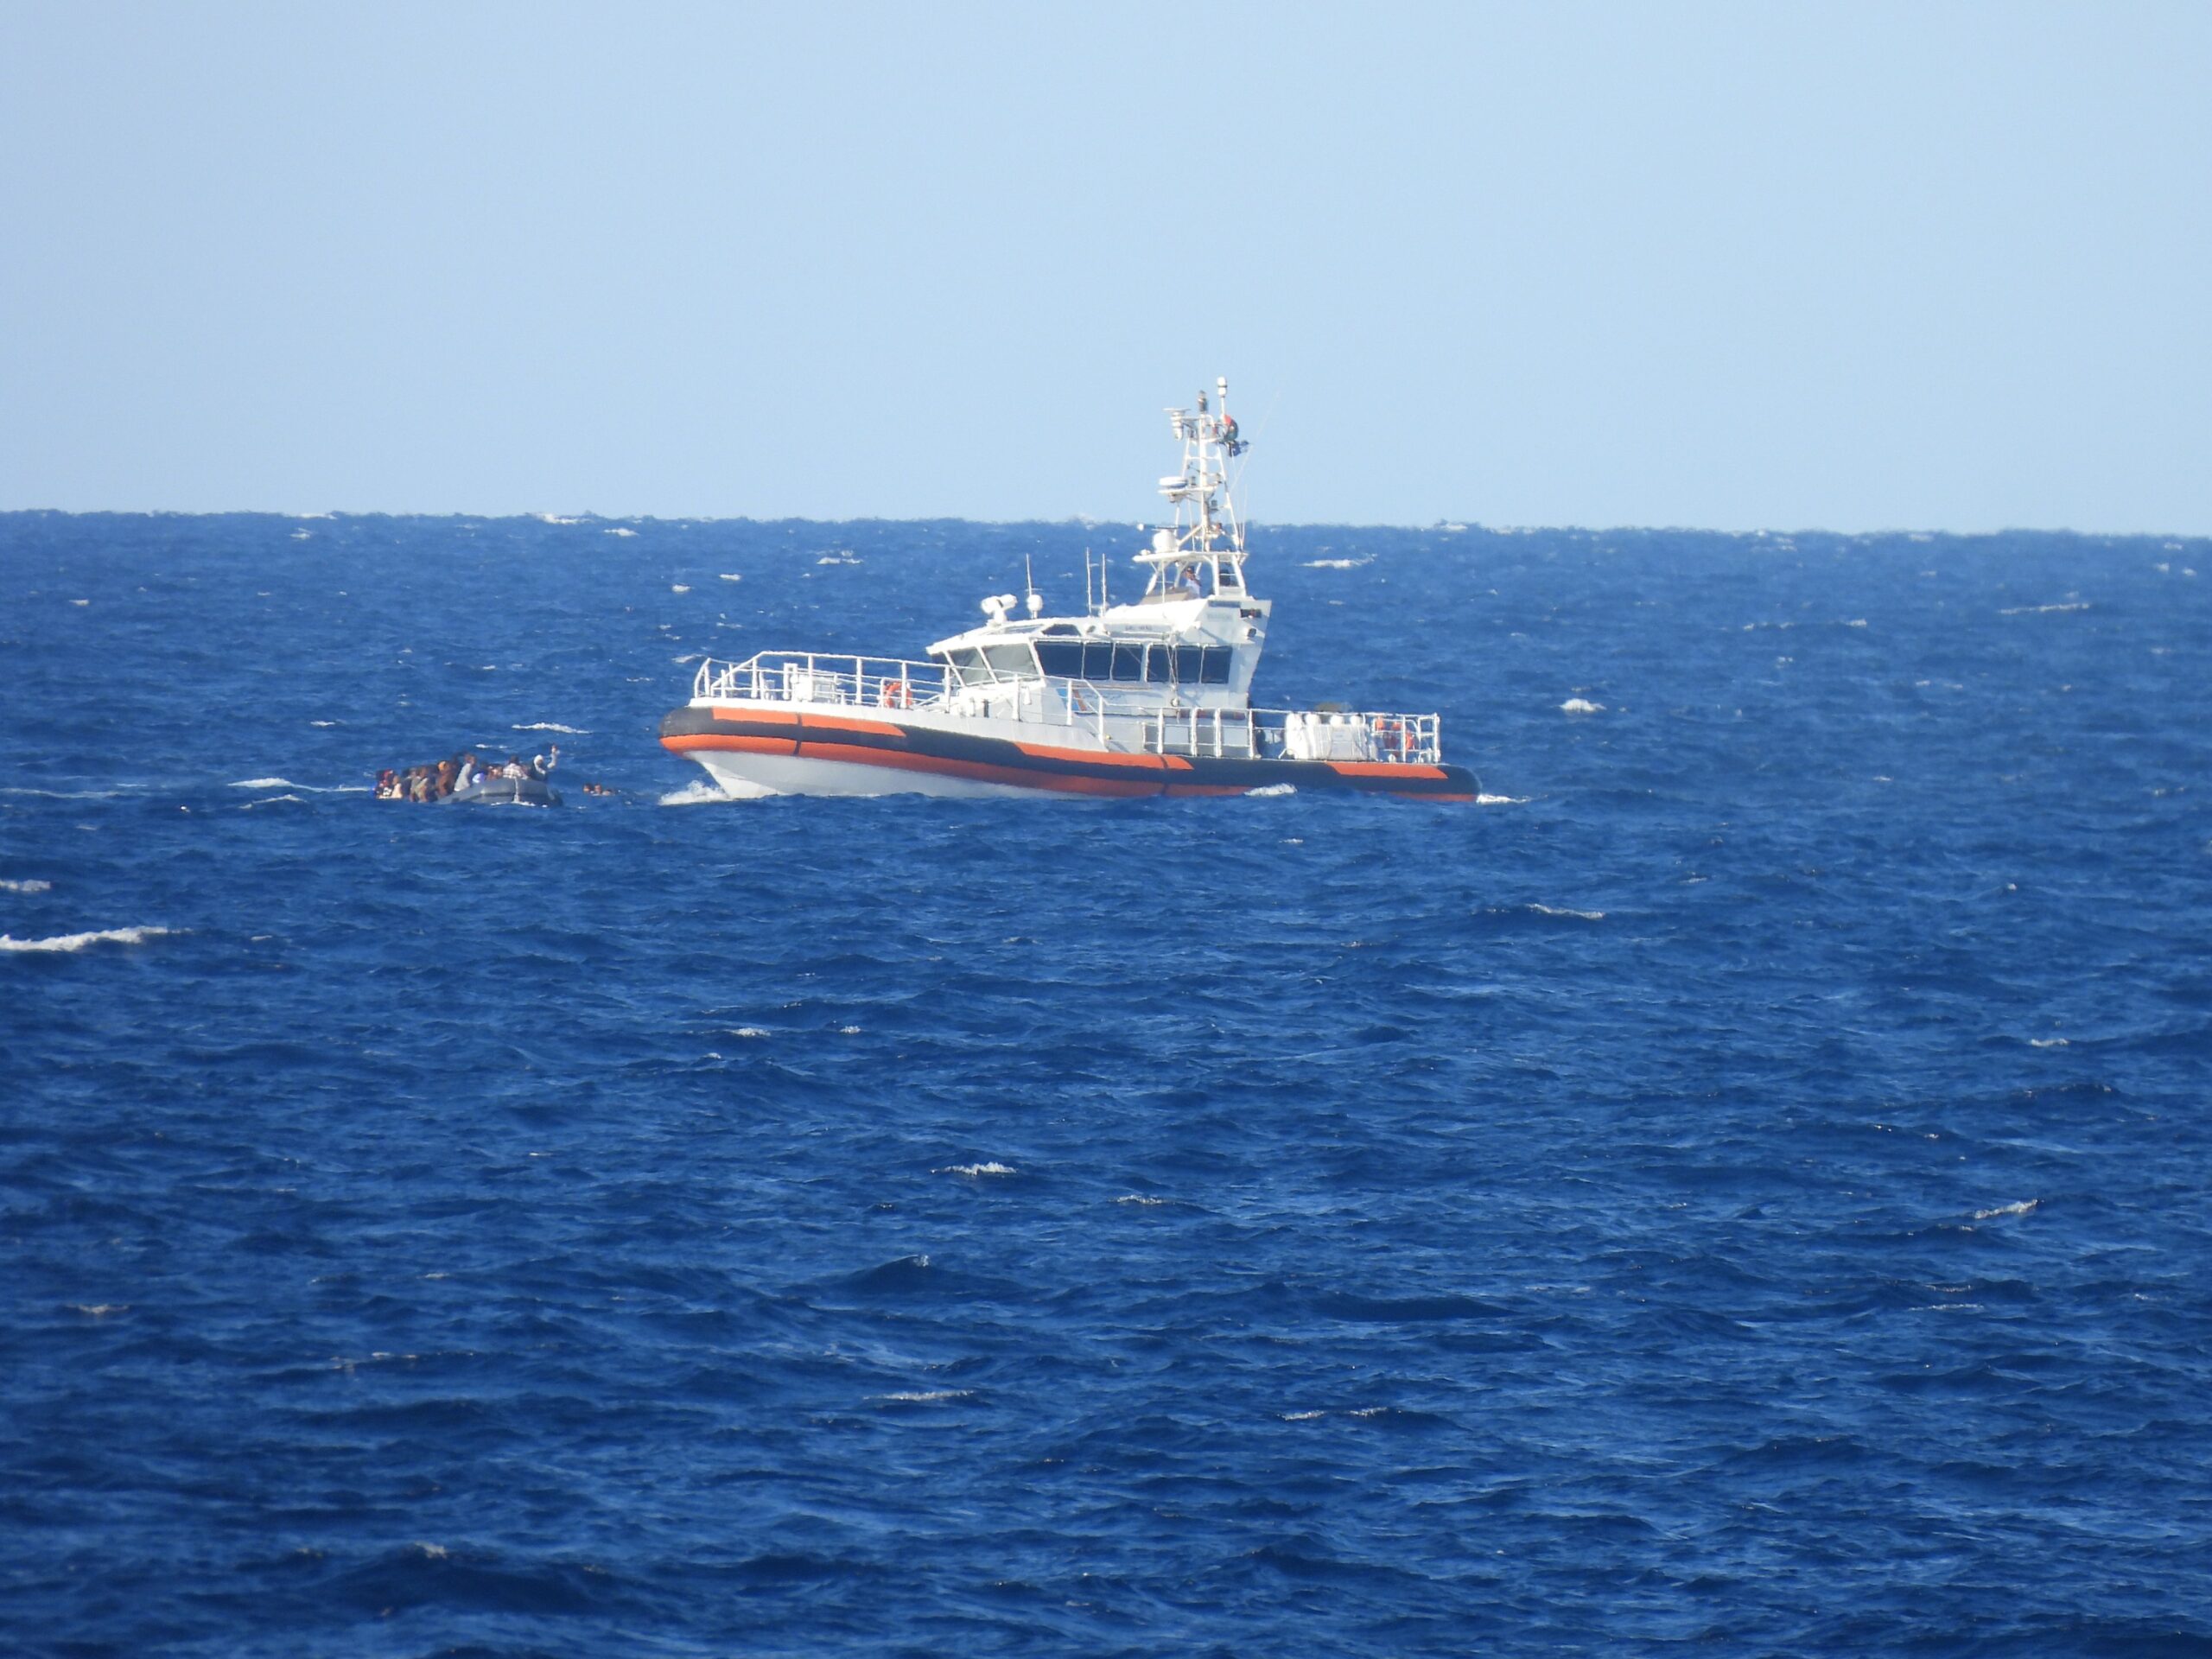 Rome on collision course: Instead of Libyan coast guard, sea rescuers are punished again